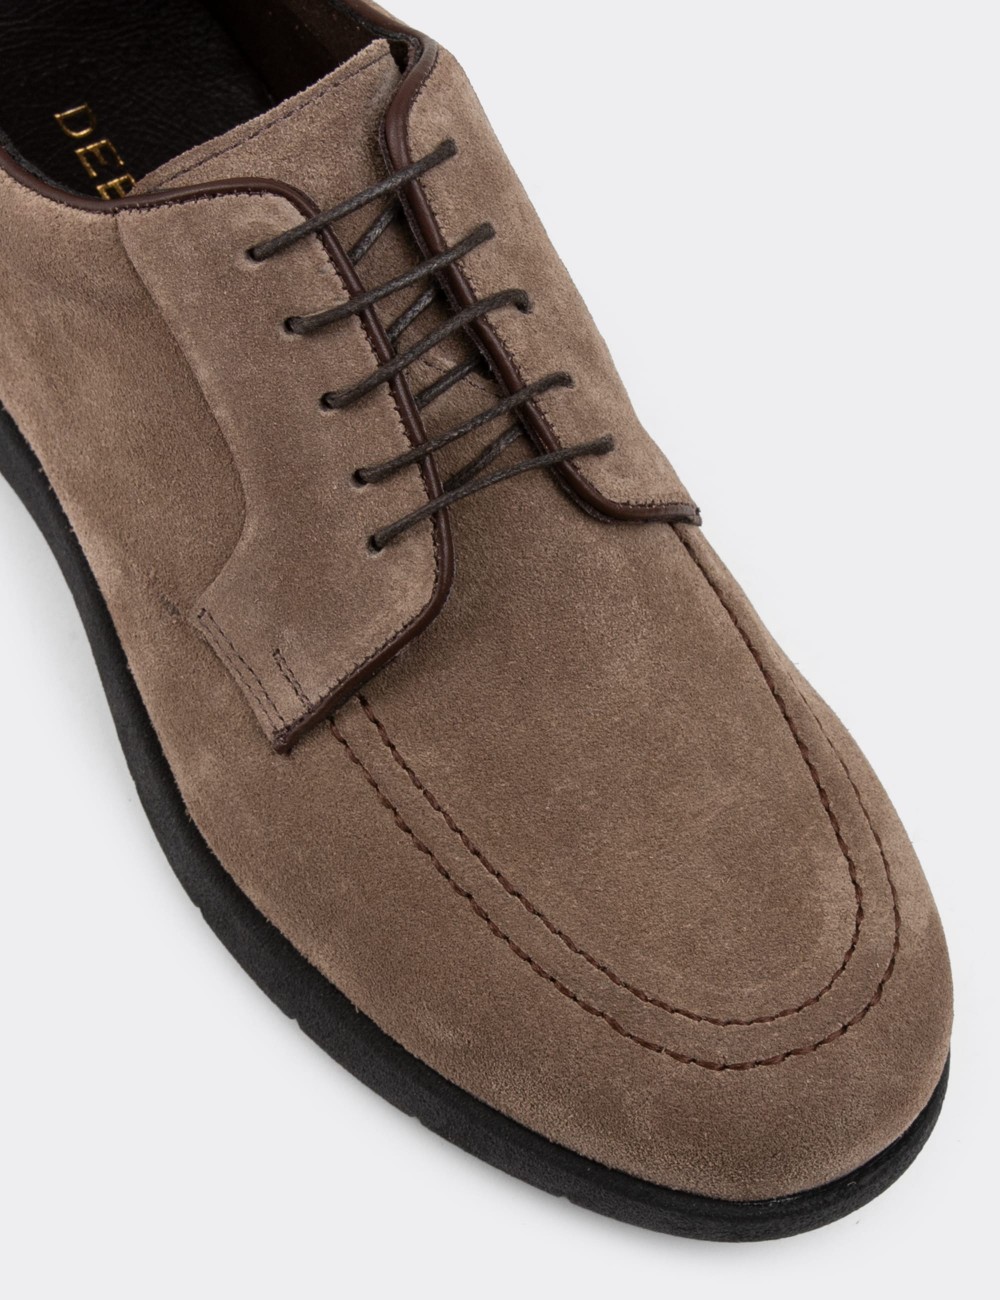 Sandstone Suede Leather Lace-up Shoes - 01930MVZNC01